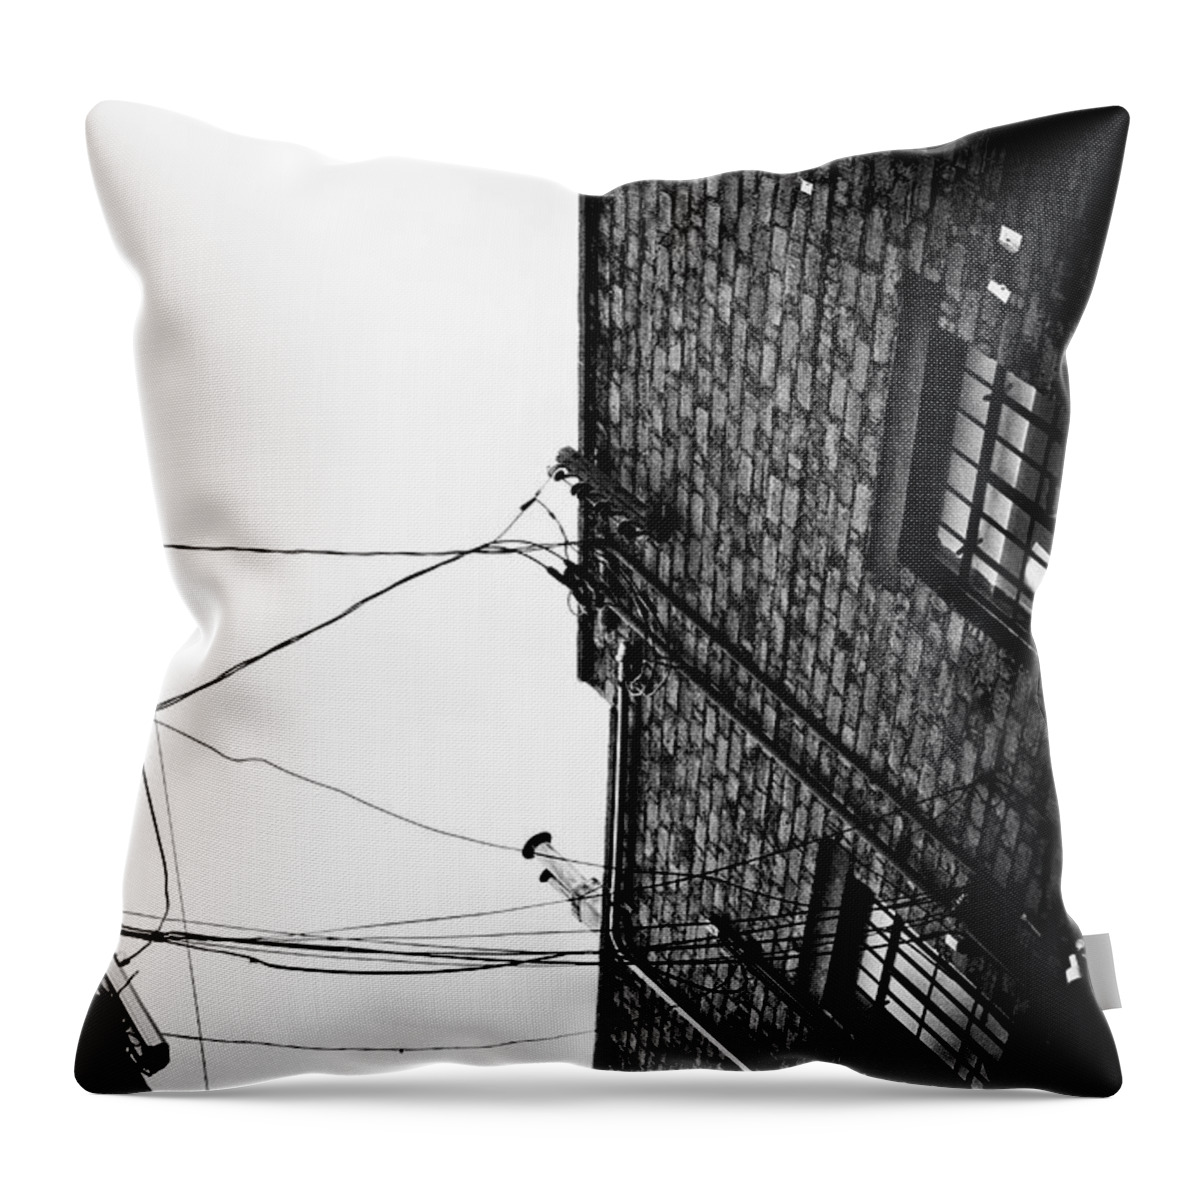 Black And White Throw Pillow featuring the photograph On A Wire by Carmen Kern